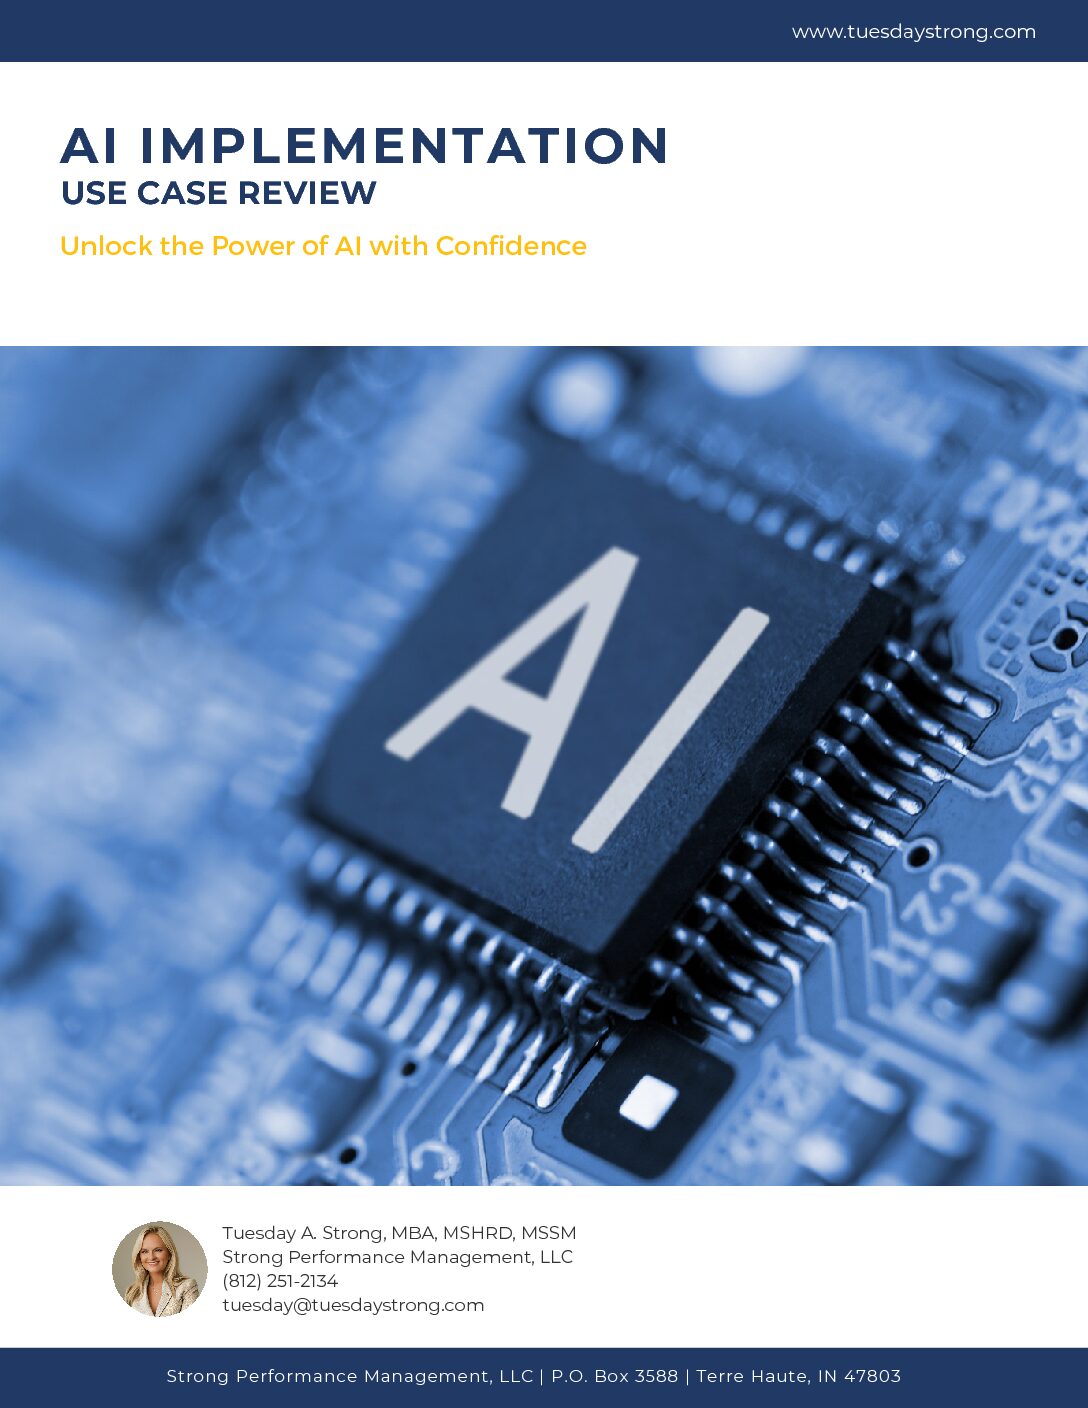 AI Implementation - Use Case Review Guide & Template